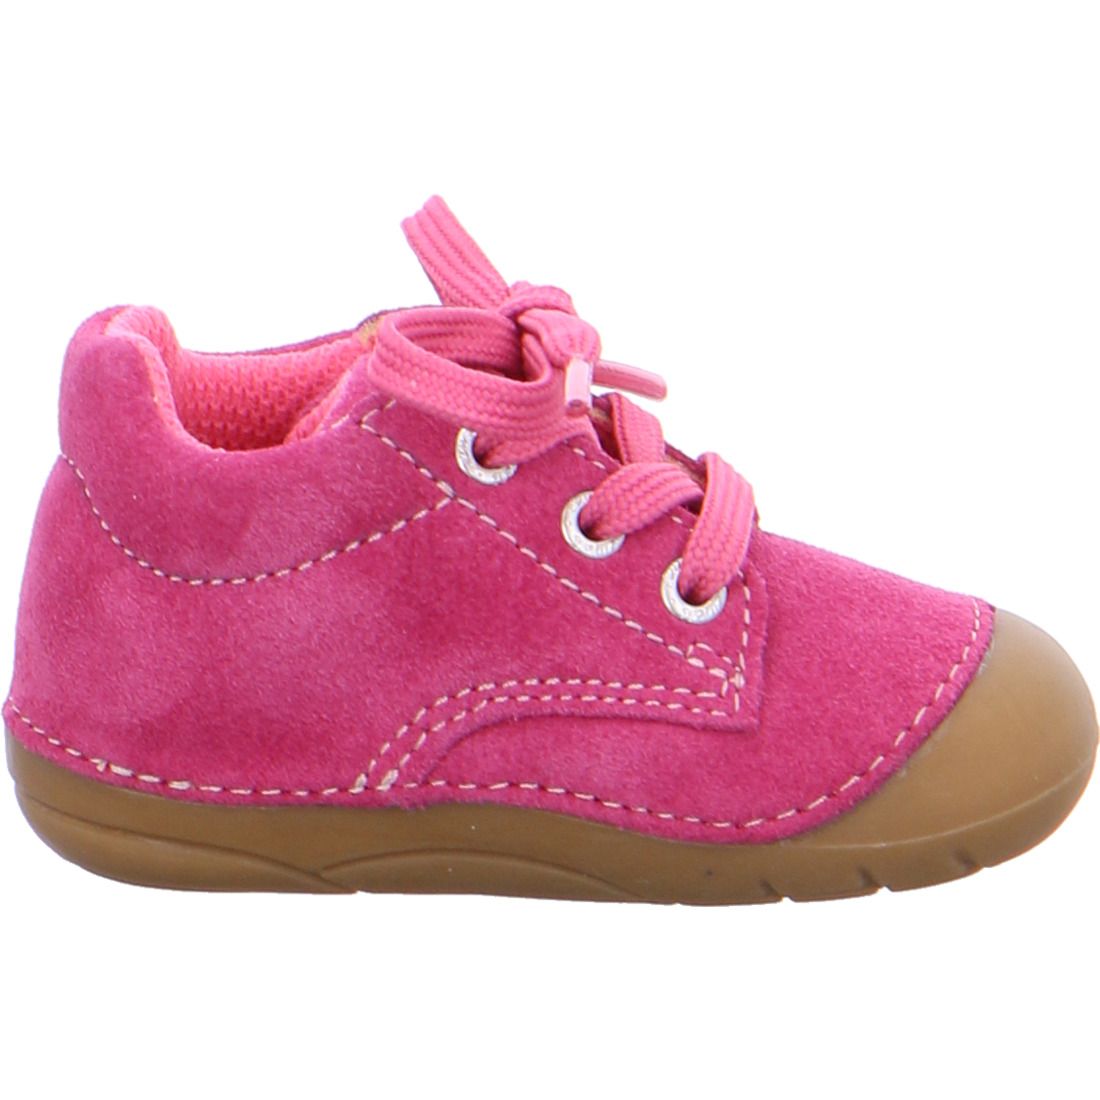 Barefoot Lurchi barefoot shoes - Flo suede pink